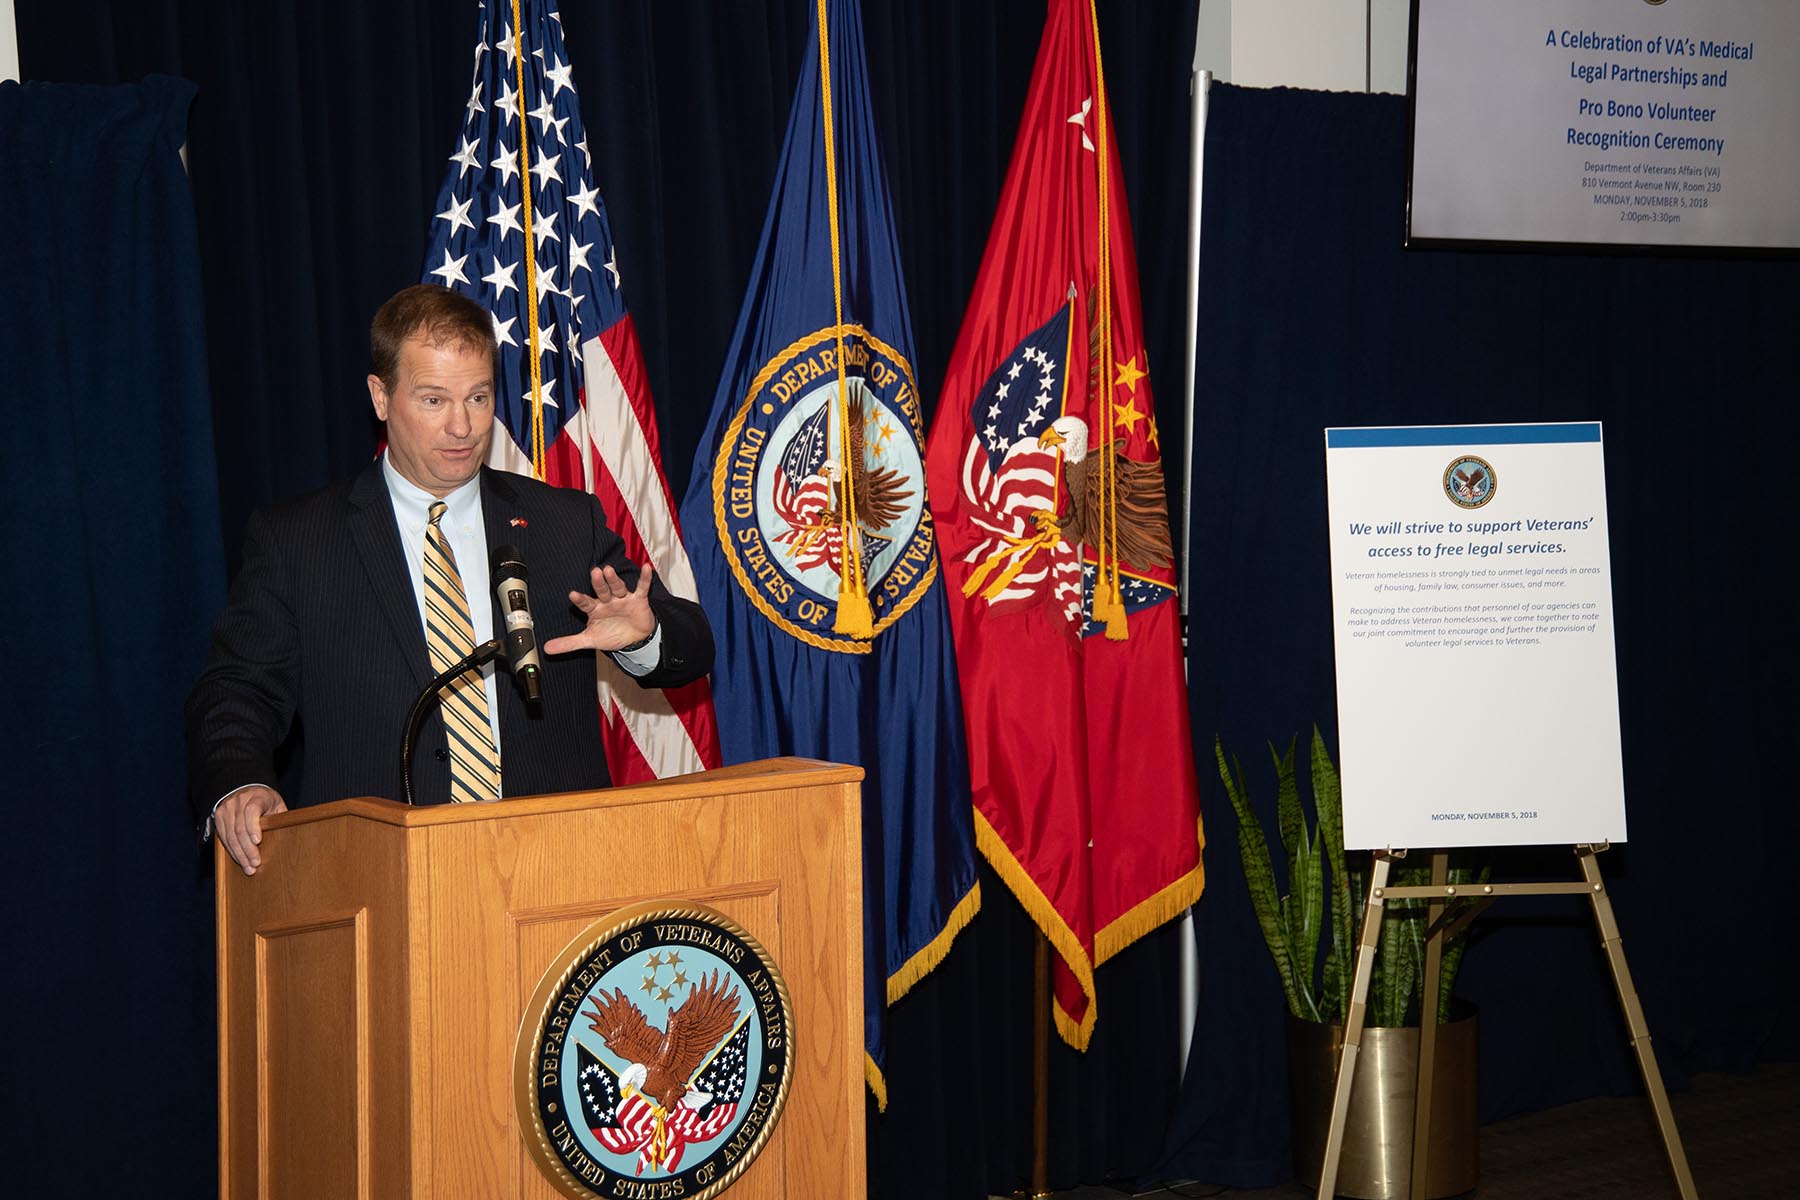 Male speaking at podium with Department of Veterans of Affairs seal on the front.